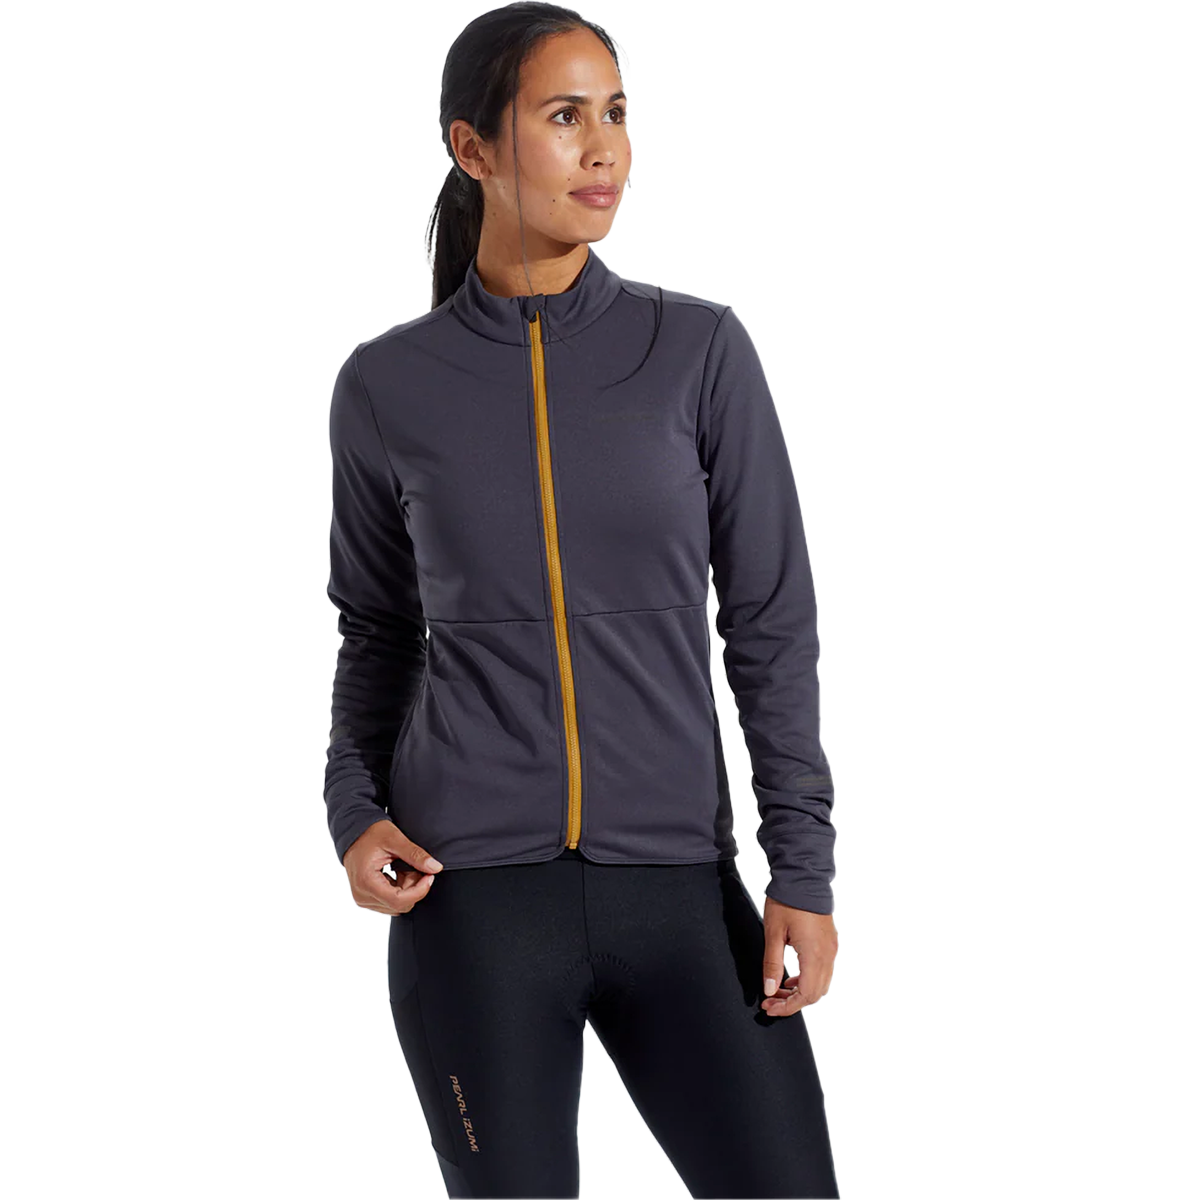 Women's Quest Thermal  Jersey alternate view